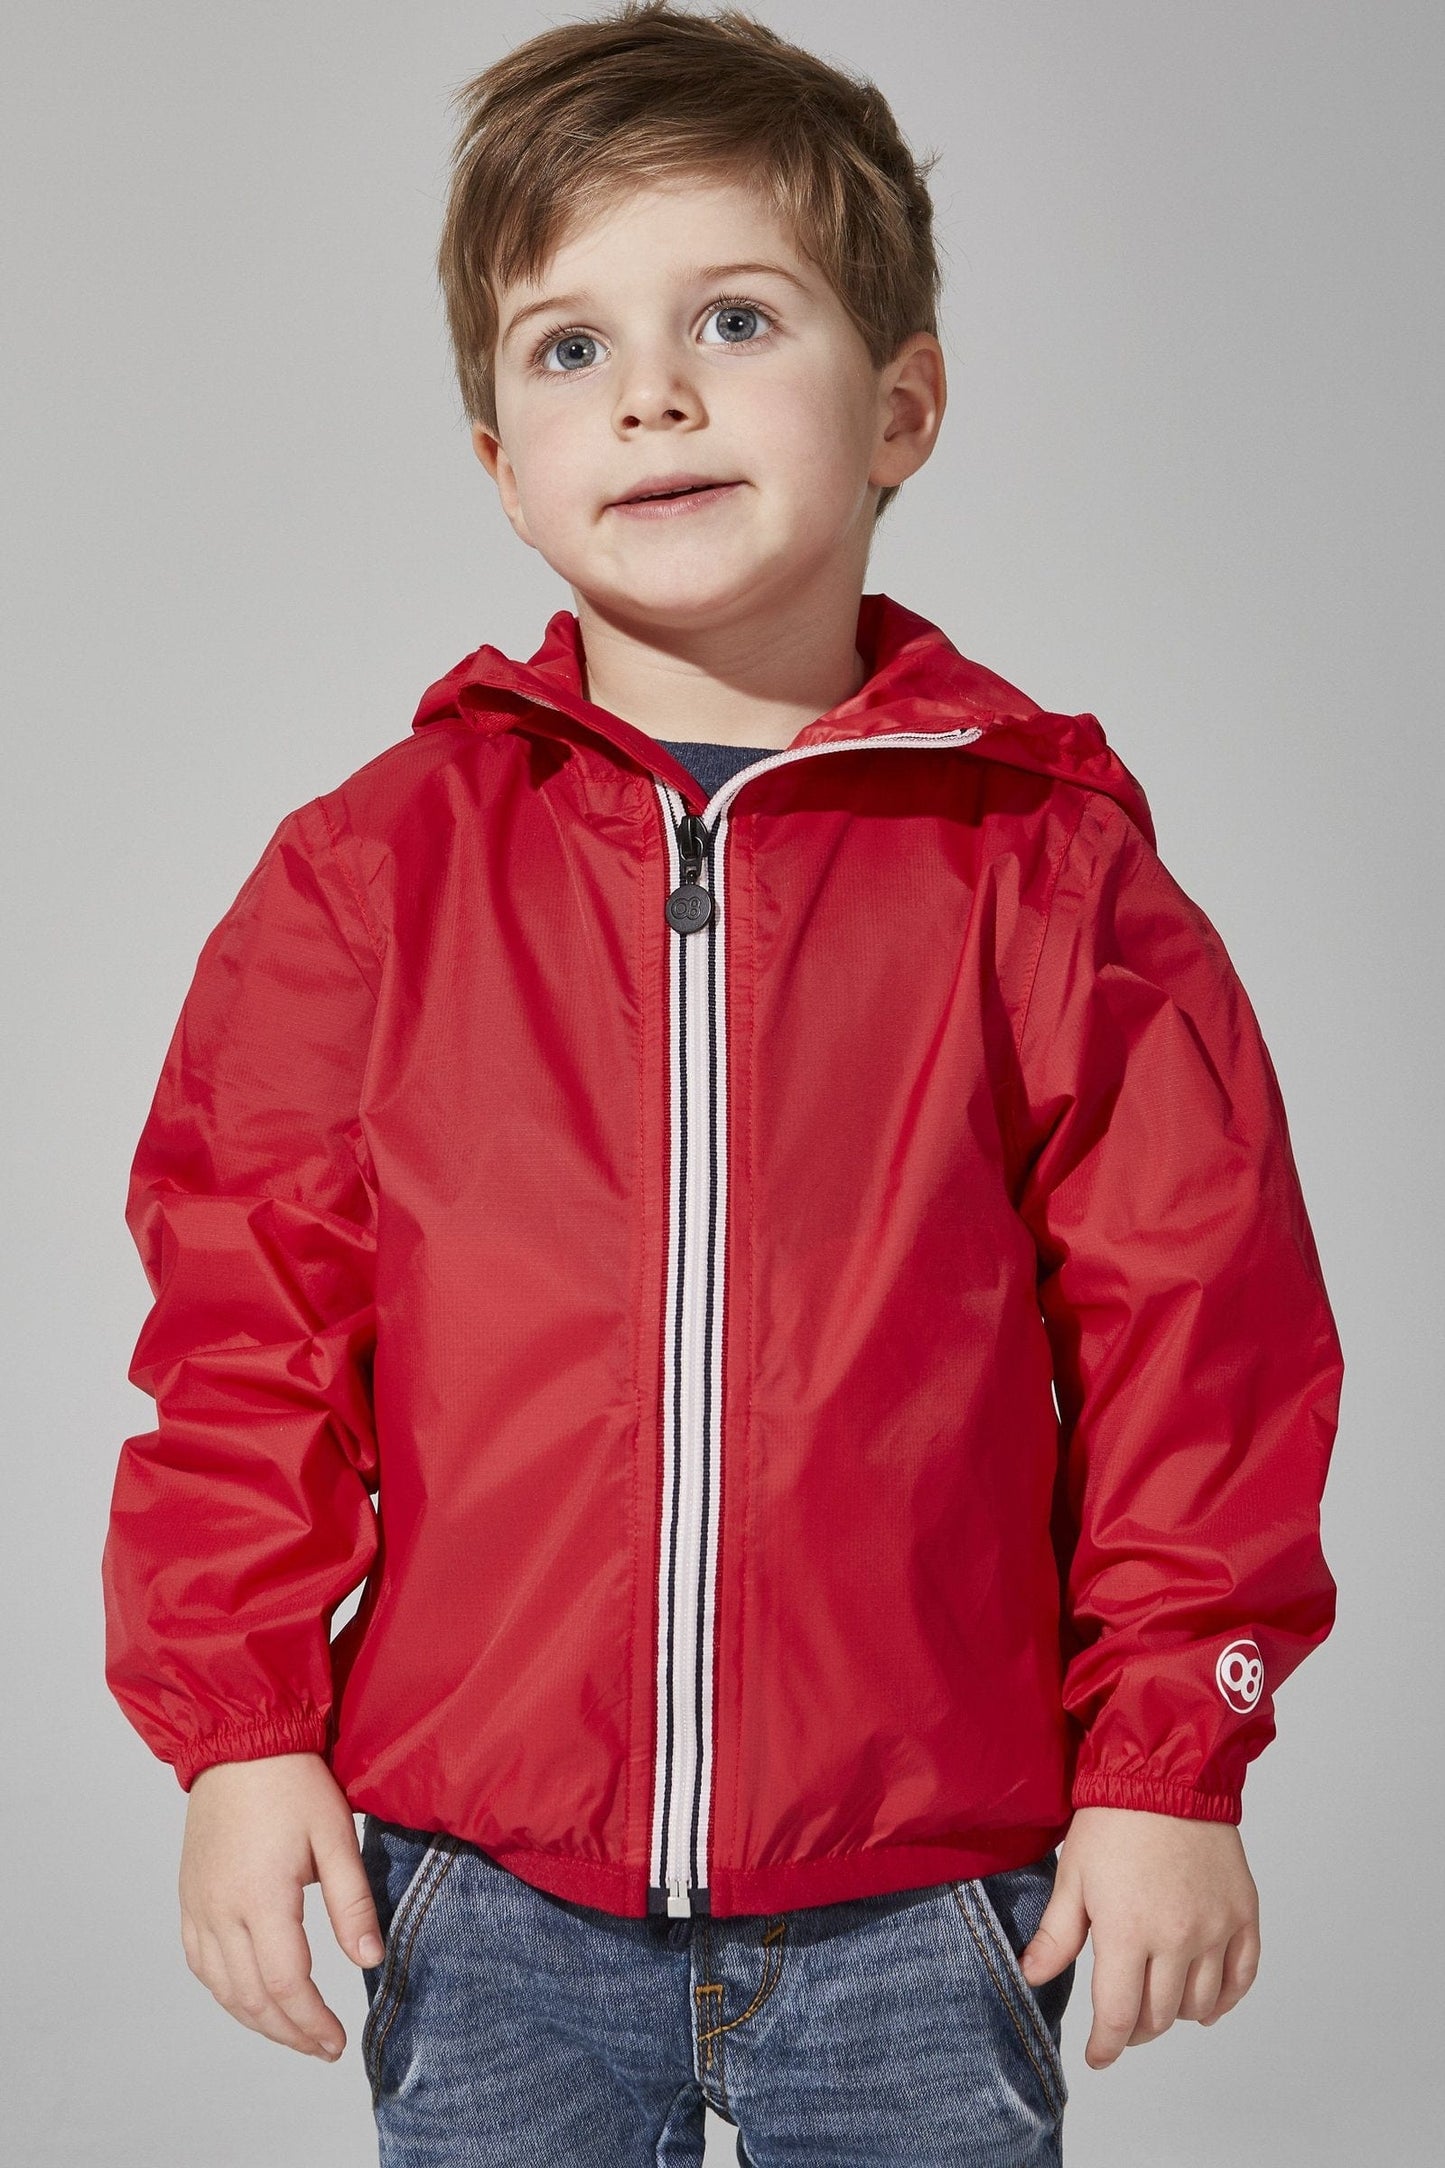 o8 Lifestyle Clothing / Outerwear 12M / Red O8 Lifestyle Packable Rain Jacket